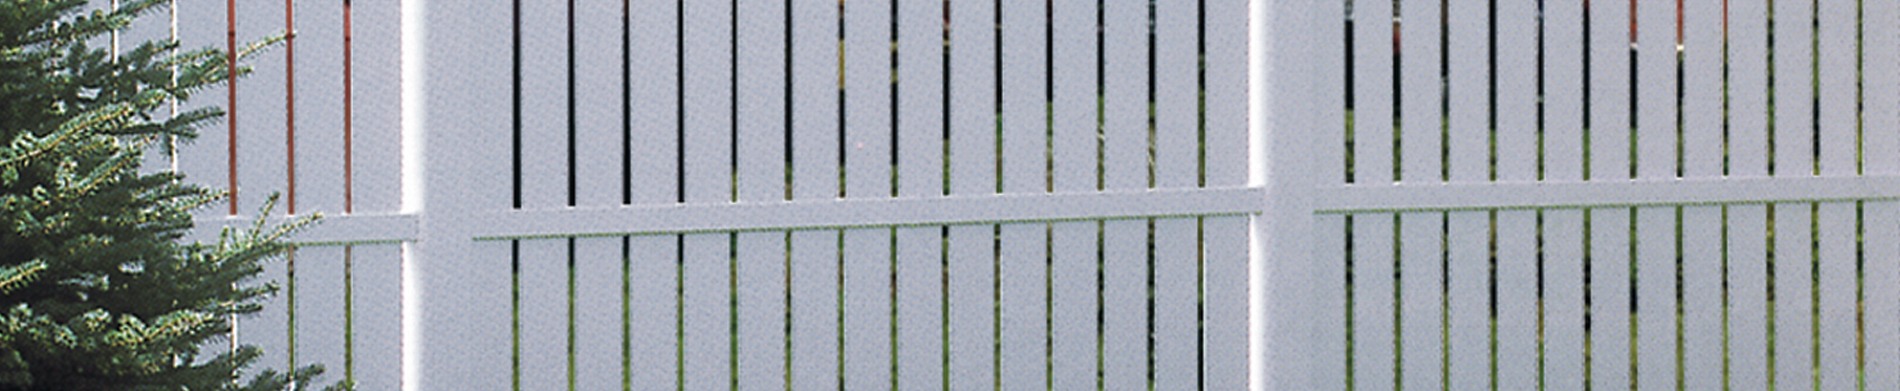 Installing a vinyl fence in Orange County – Certified and beautiful fences from Duramax